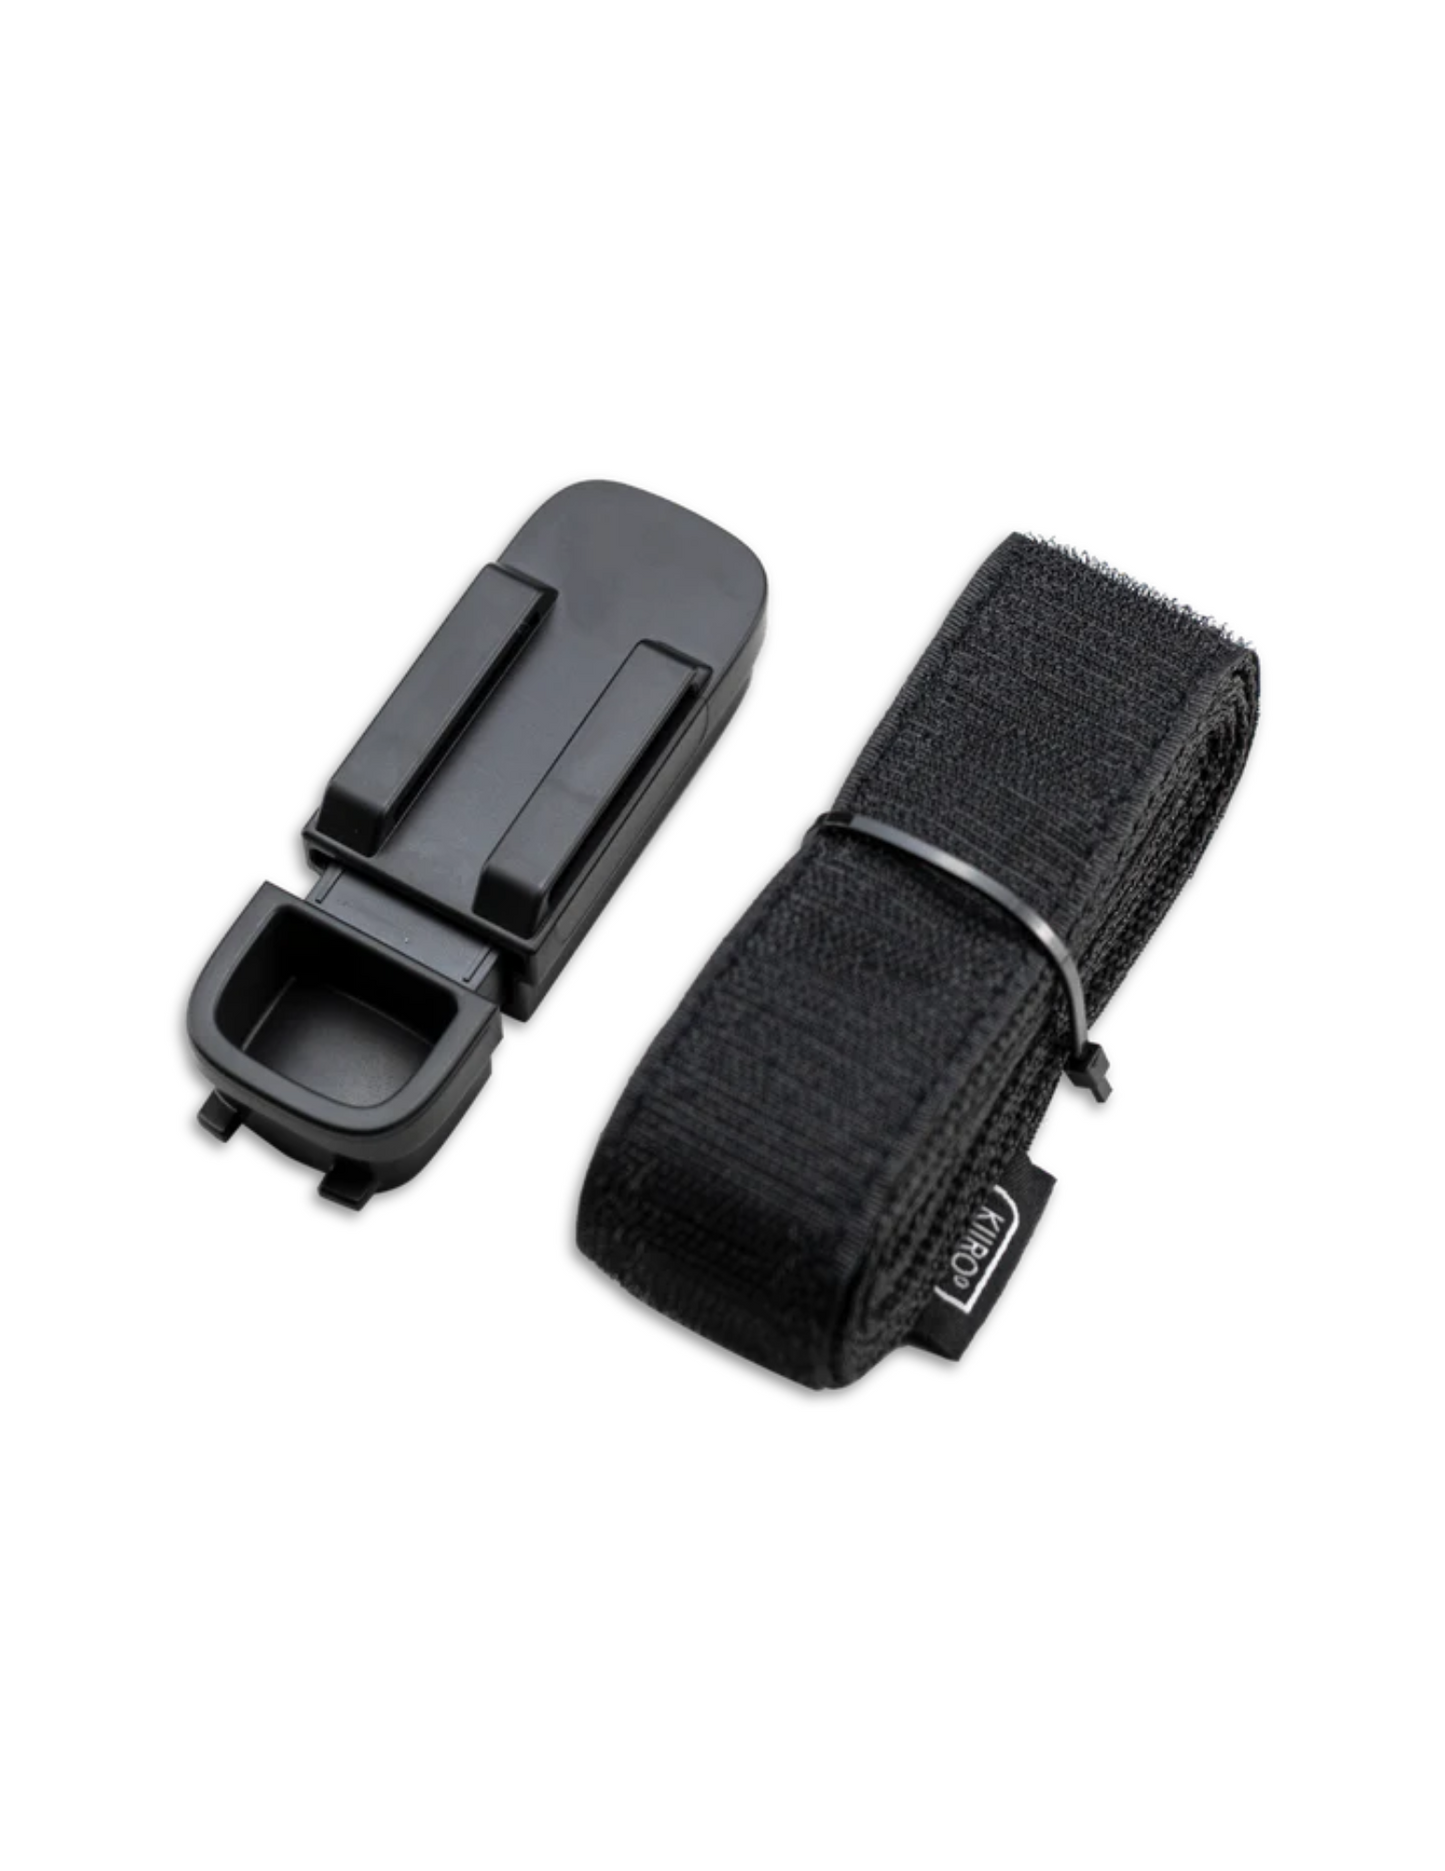 Image shows what the parts to the Keon Neck Strap Accessory by KiiRoo look like before assembled.